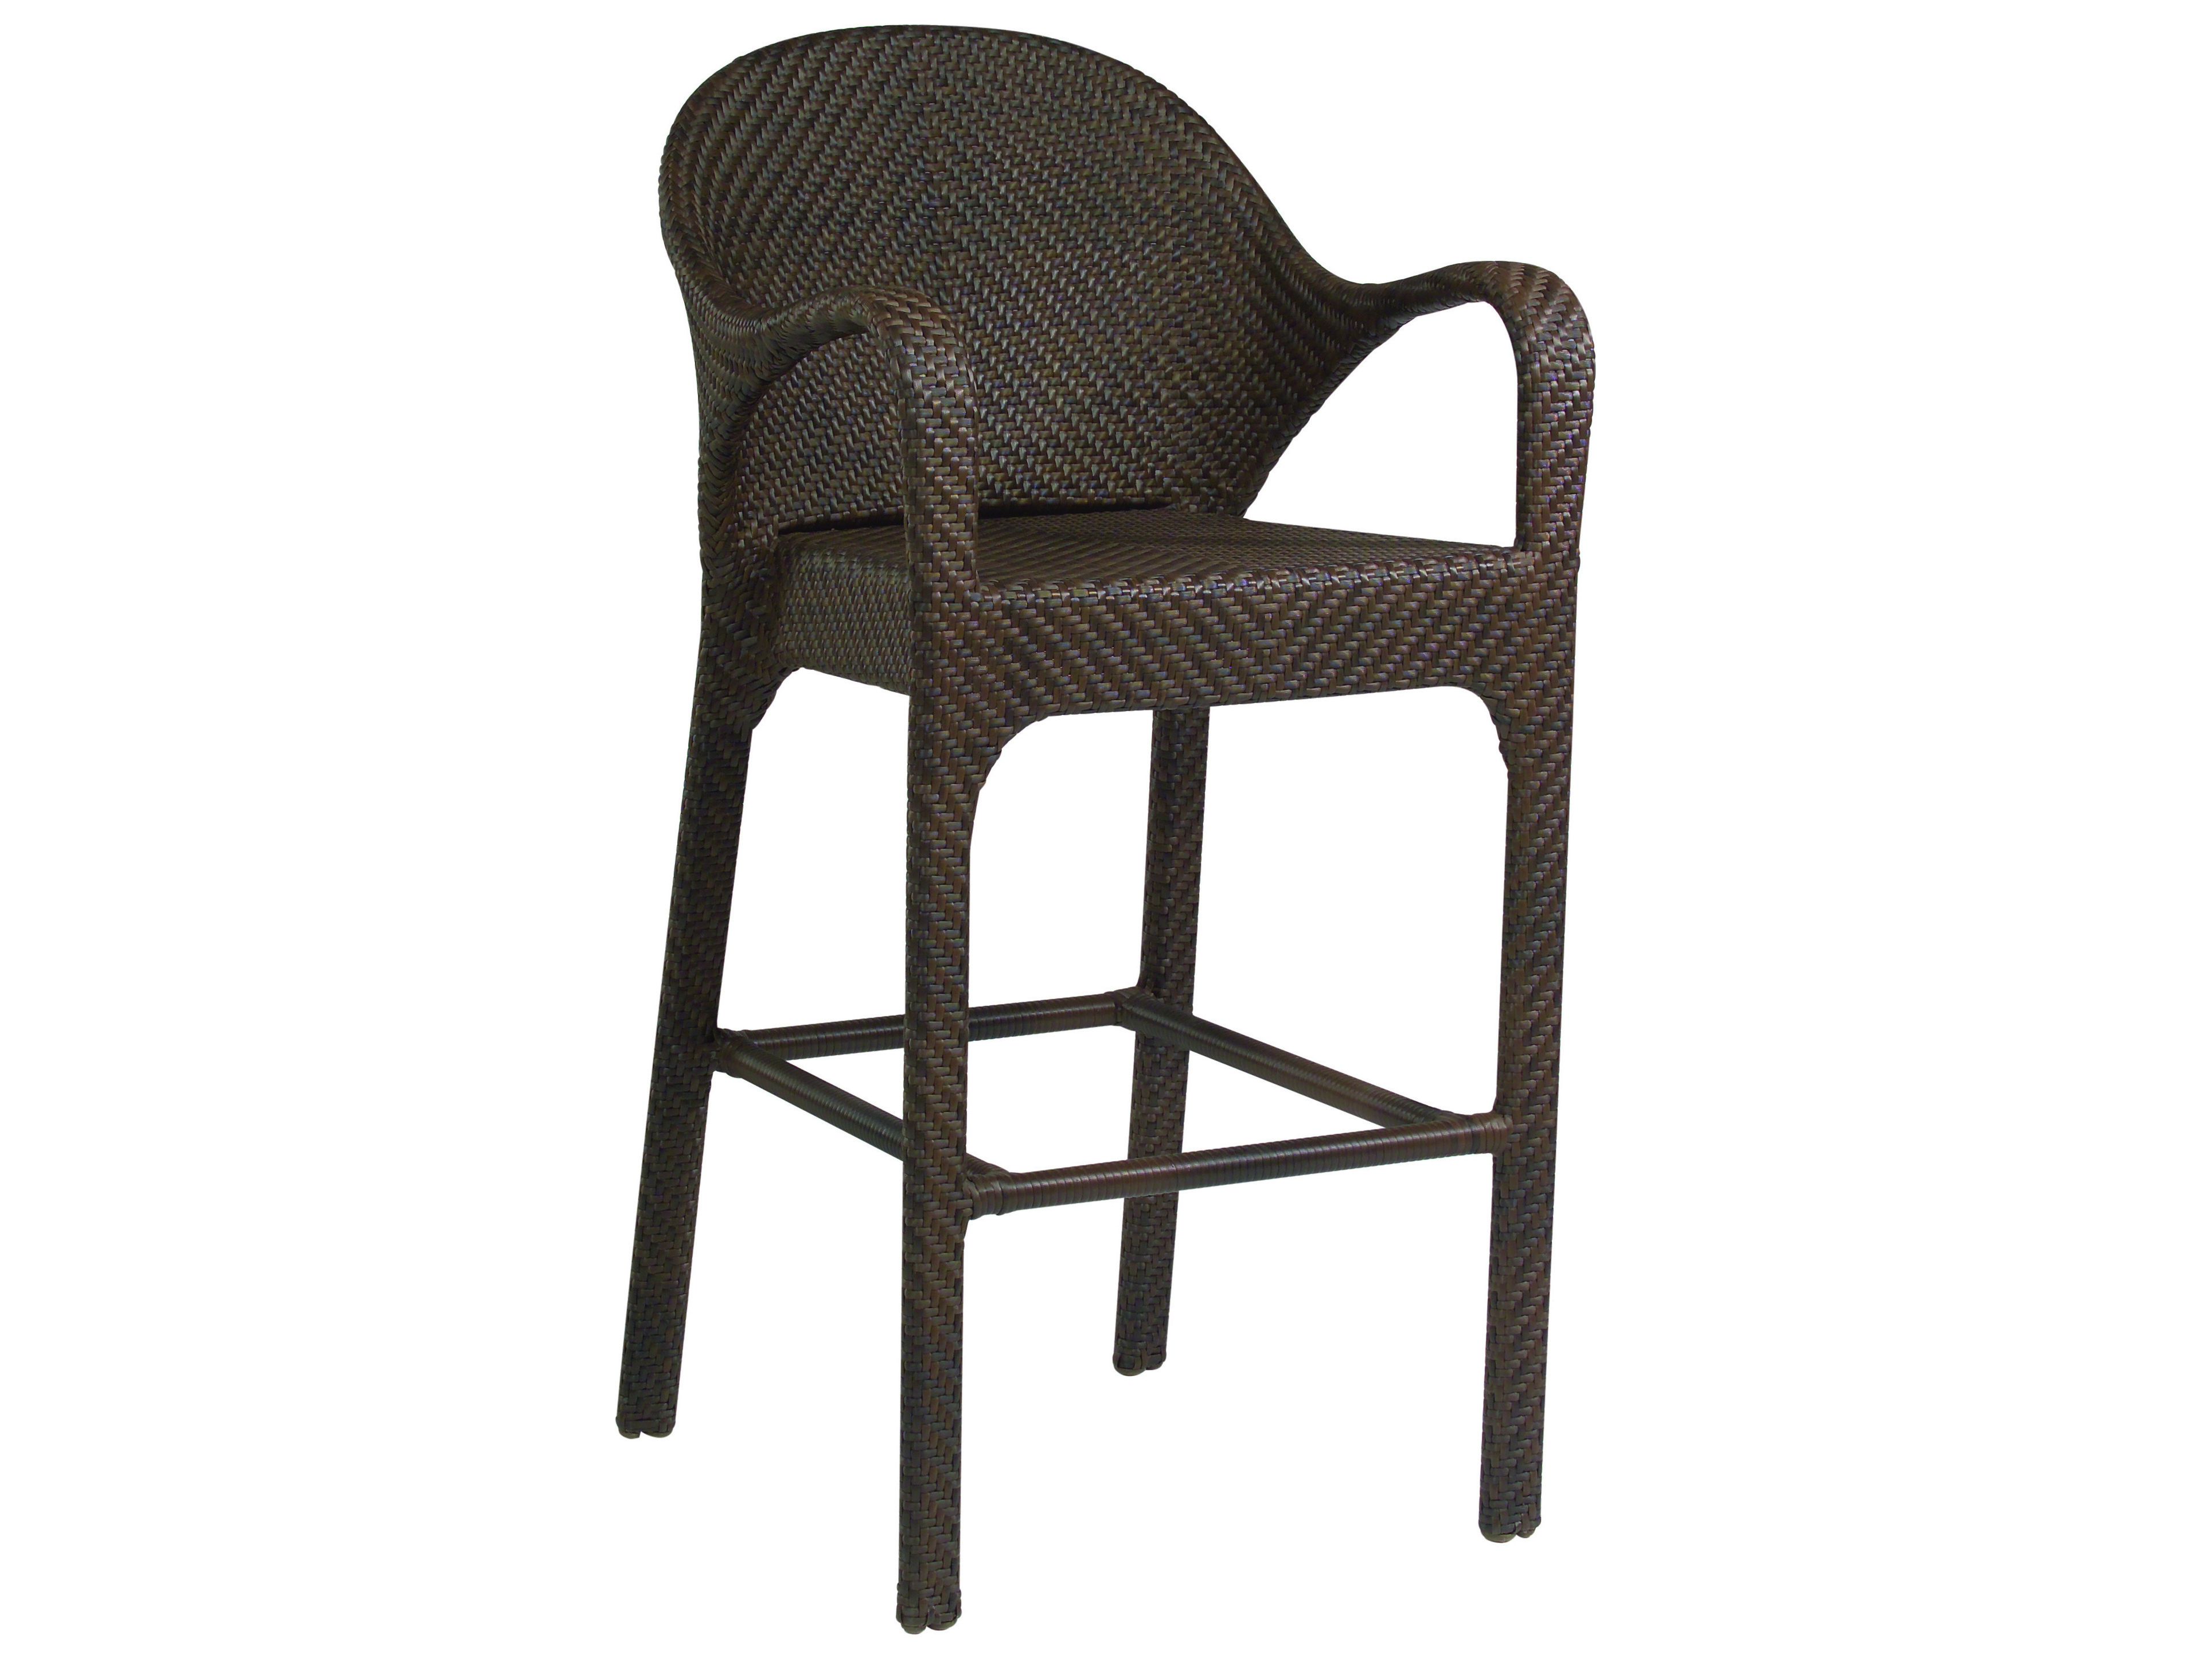 24 inch wicker bar stools for outdoor kitchen